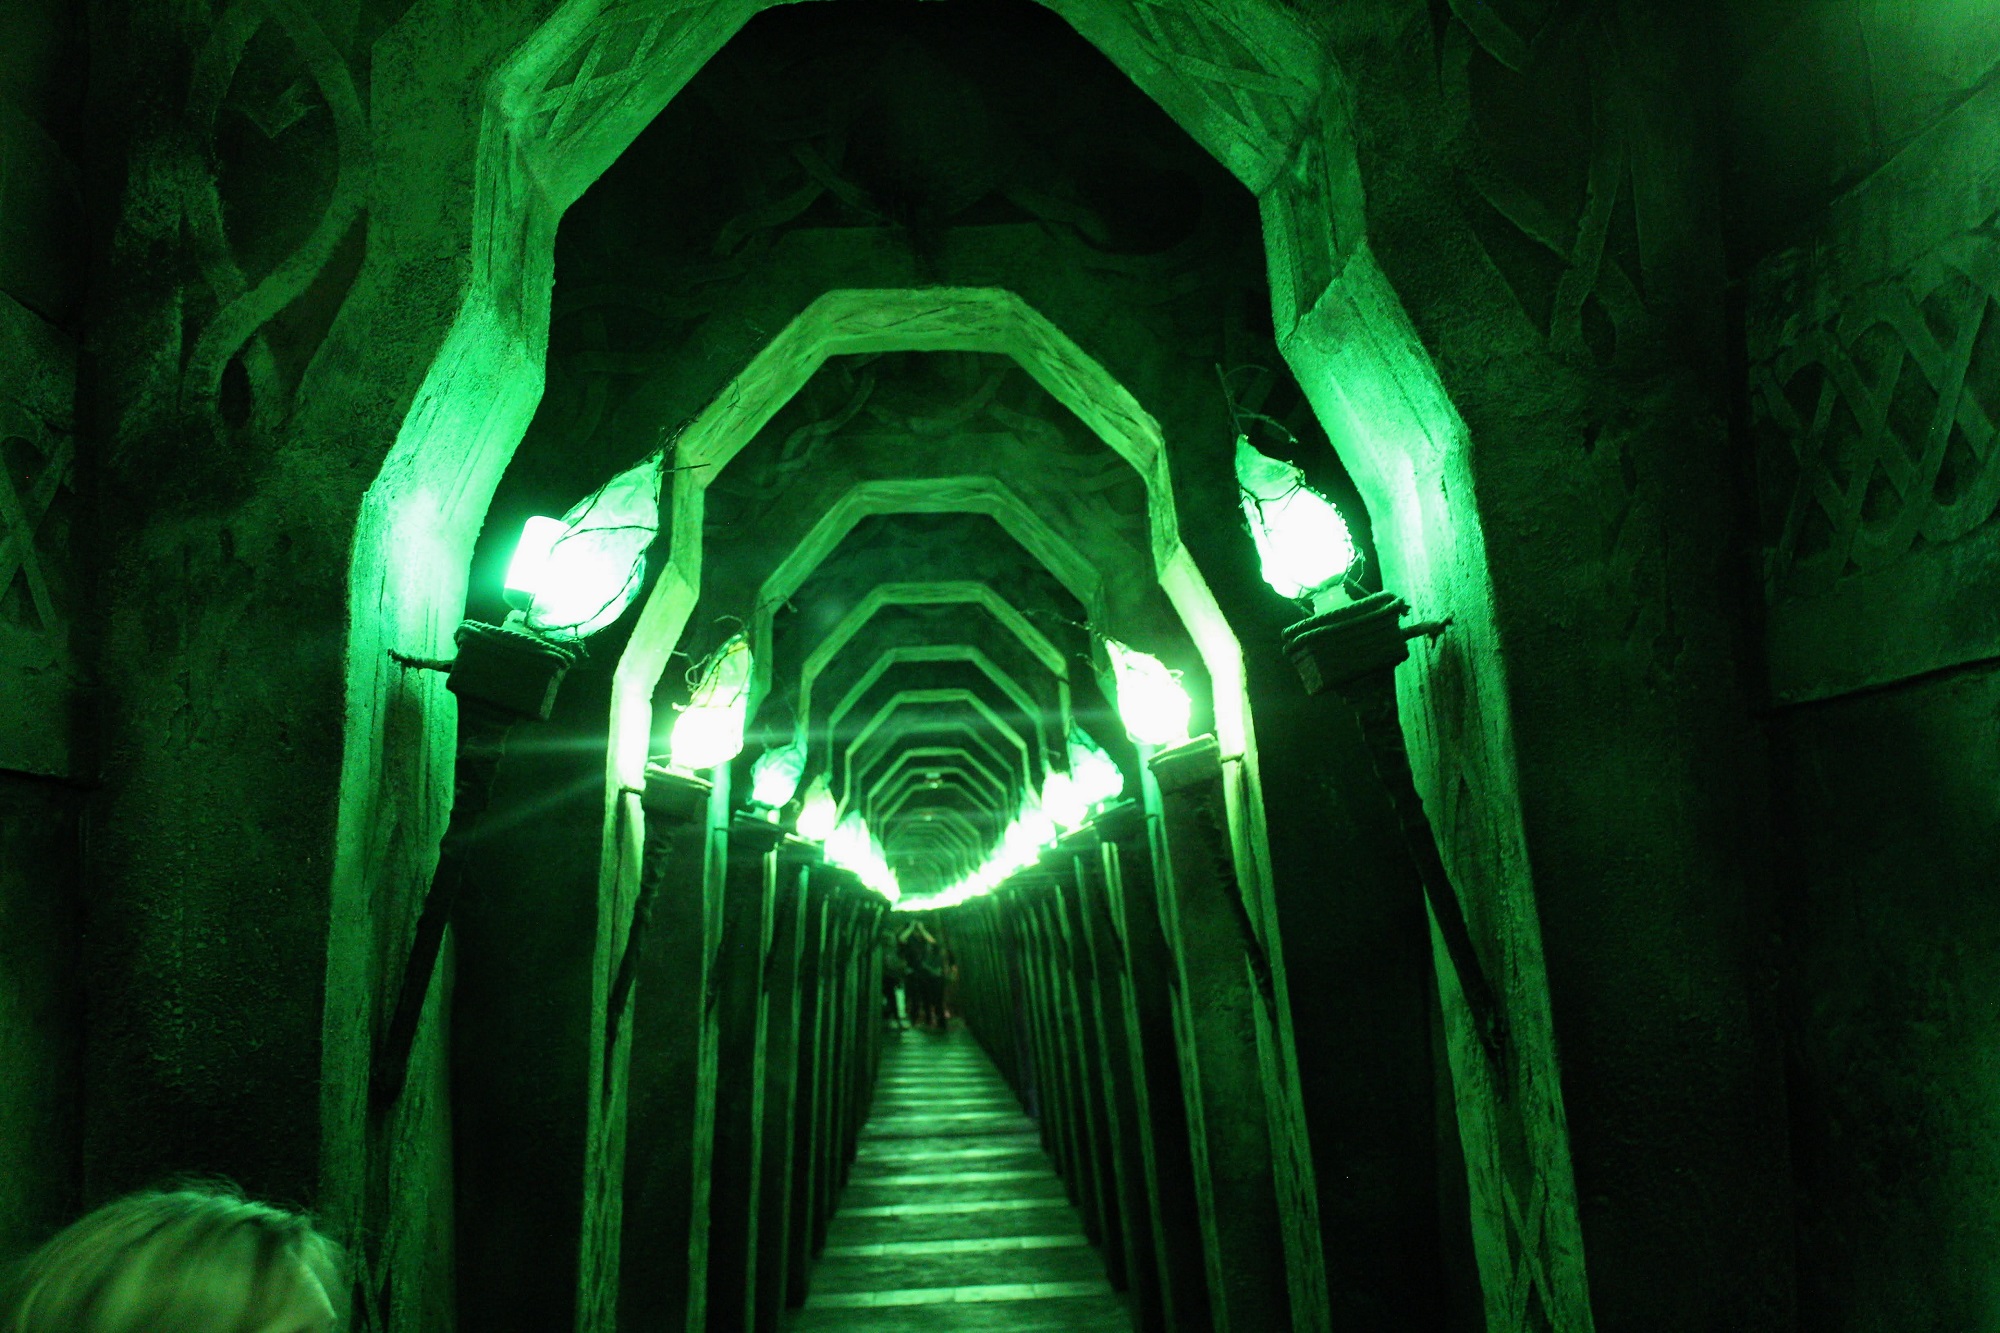  In the earth realm of Wizard Quest, there is a deep green corridor lined with Celtic arches and flickering green torches. While mirrors on both ends produce the illusion that the hallway is endless, Corena Ricks says the actual hallway is only around 30 feet long – but visitors aren't aware of how long it really goes until they reach the mirror at the end. (Trina La Susa/WPR)